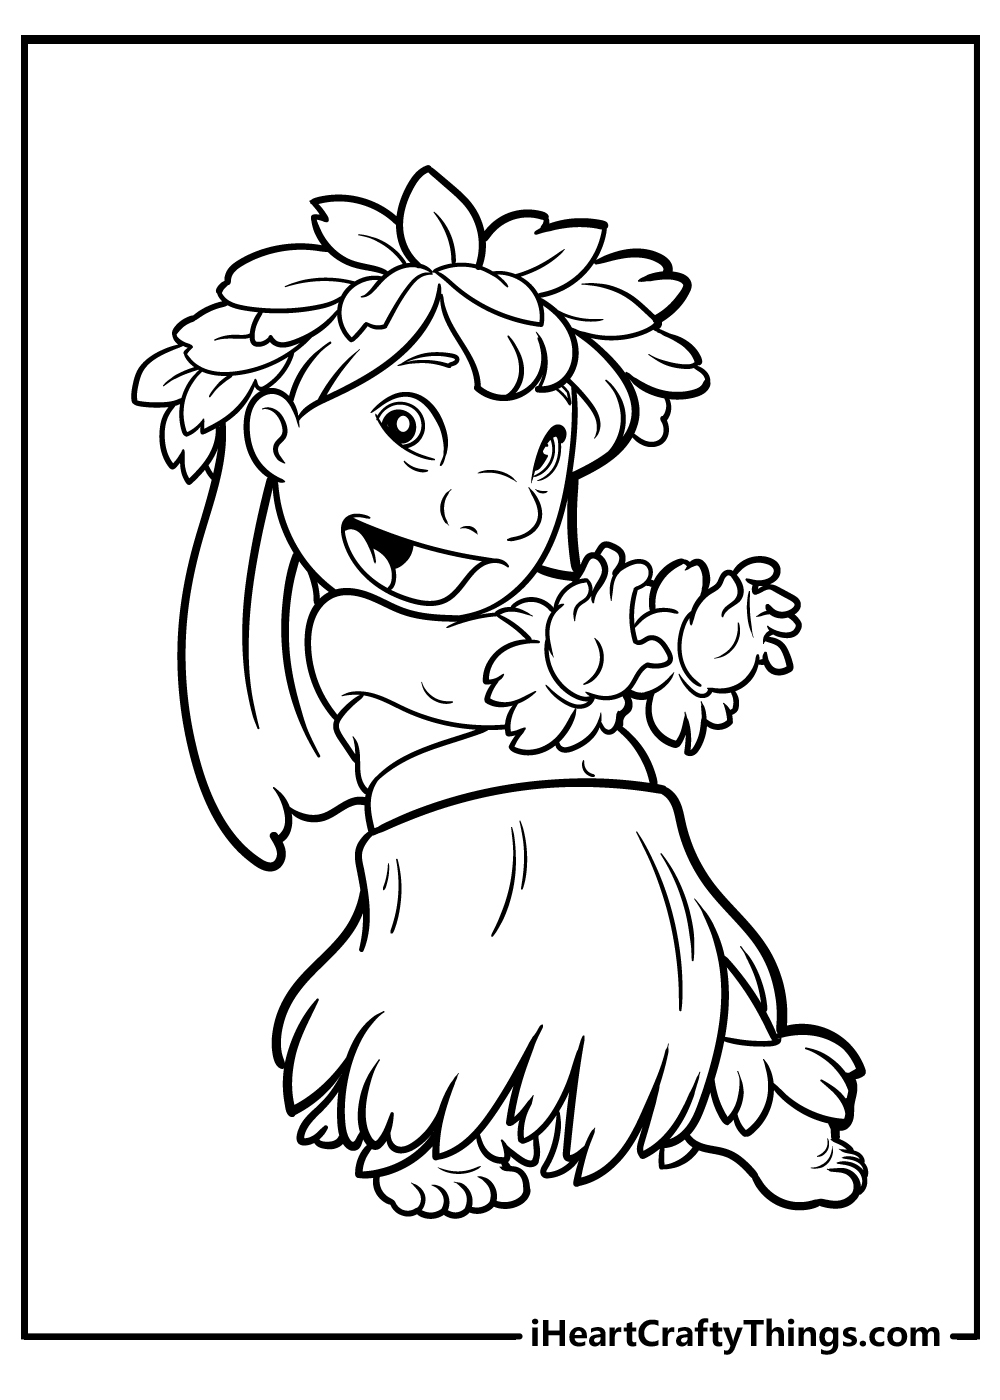 Lilo stitch coloring pages free printables